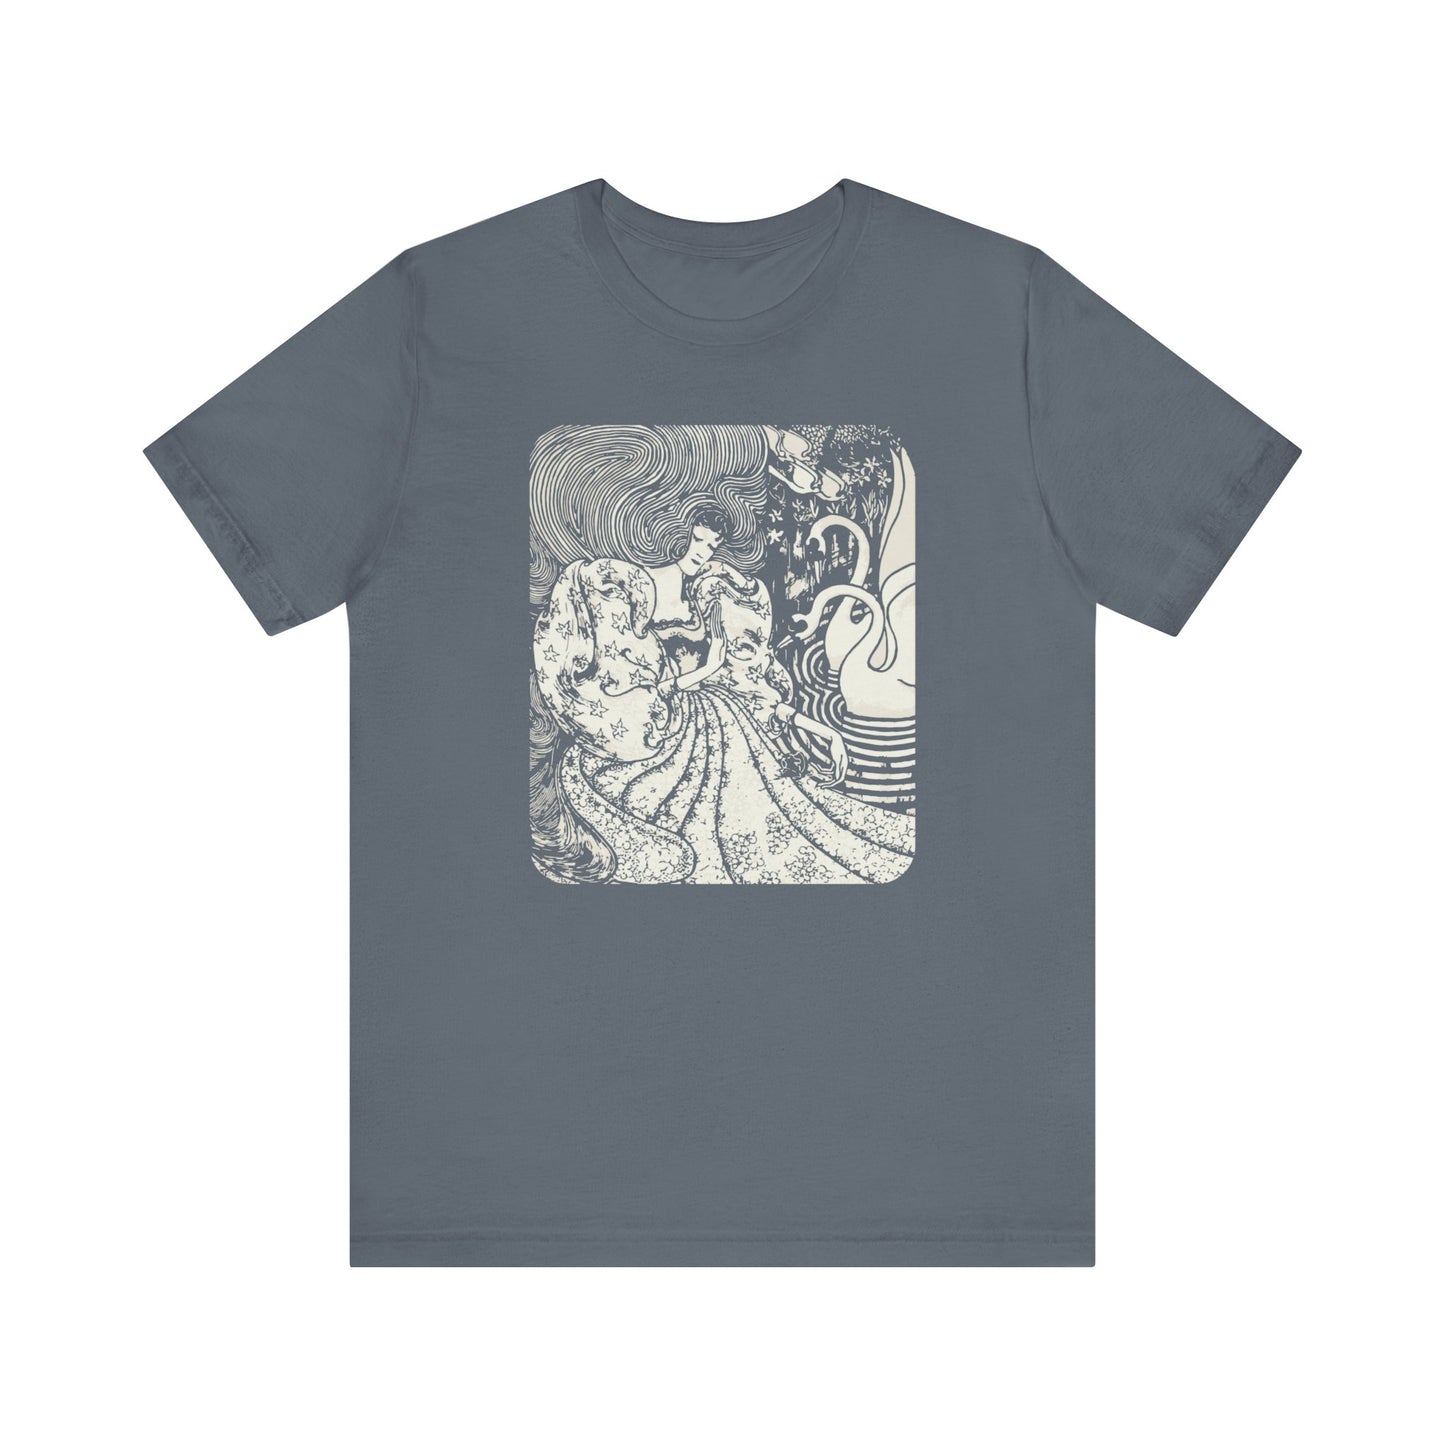 Woman and Swans - Unisex T-Shirt